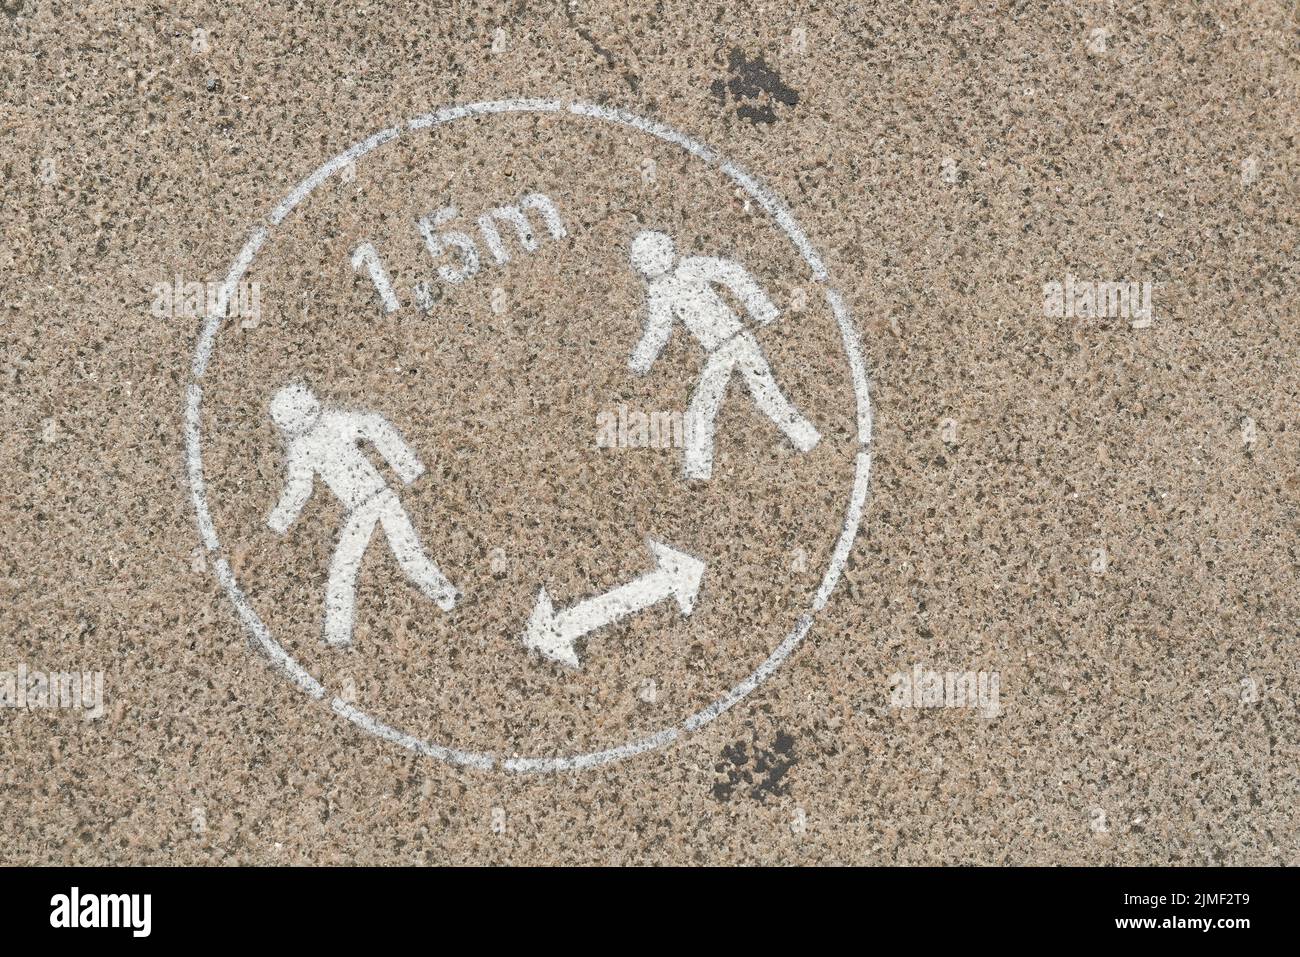 Request to keep safe distance due to Corona pandemic on a sidewalk in Berlin Stock Photo